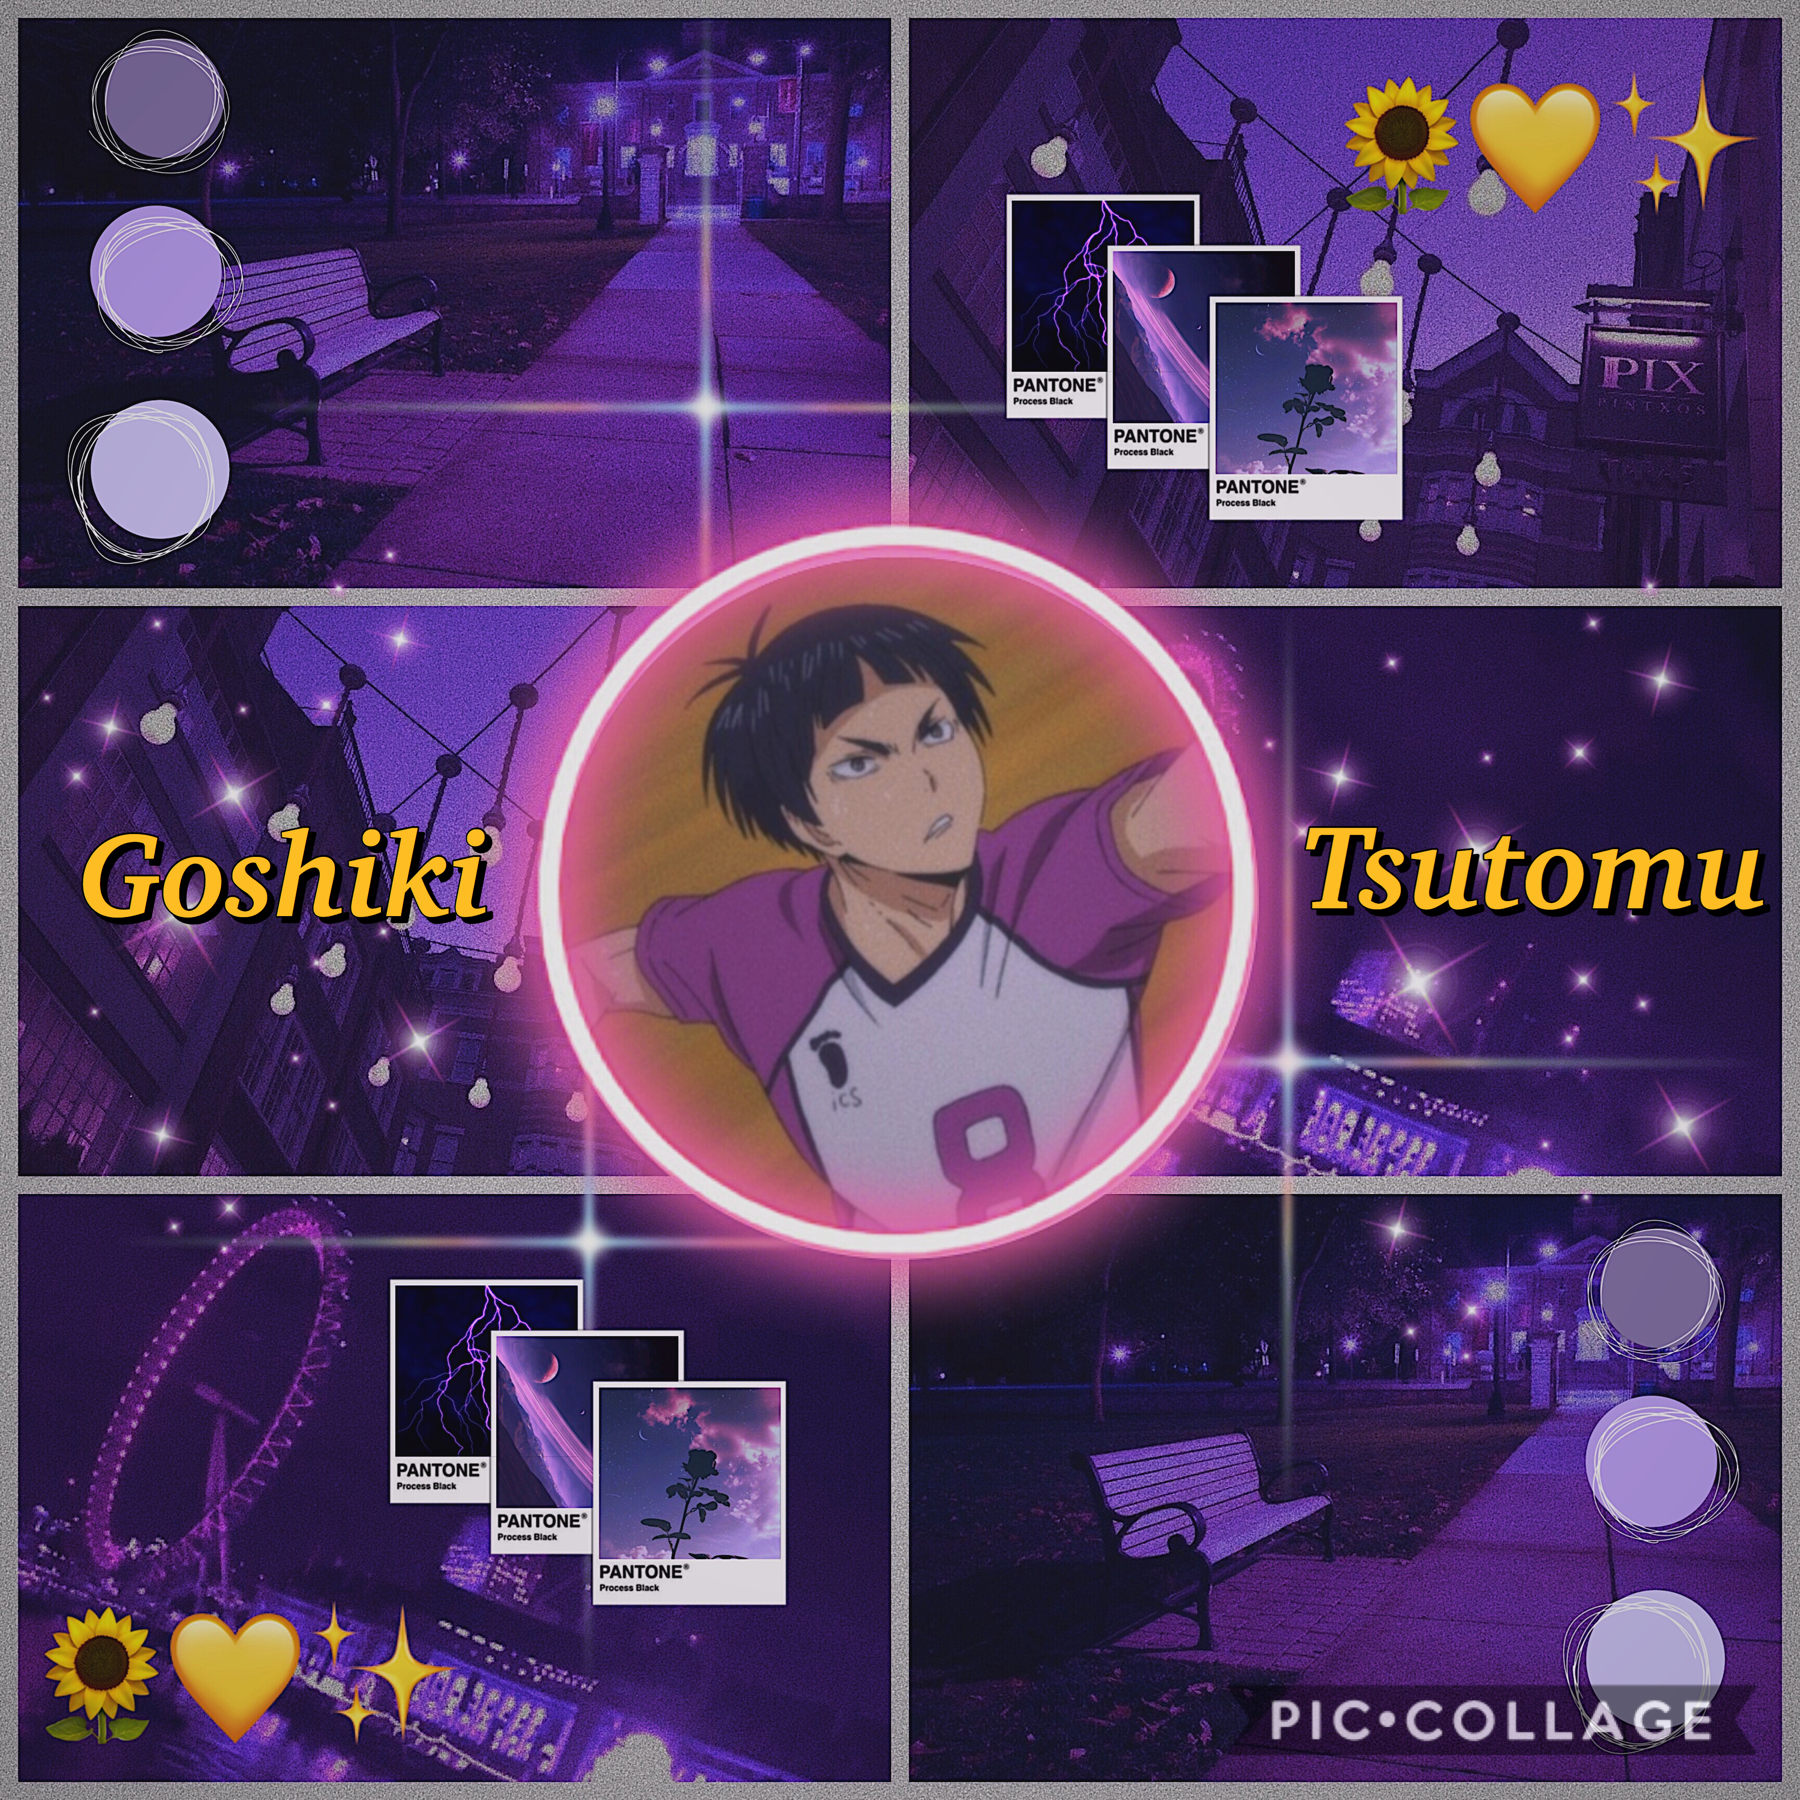 •🚒•
🌷Goshiki~ Haikyuu🌷
Goshiki is my son- Rose look it’s your grandson HAHAHA🤩. Anyways, this account is really going to go from kpop-anime so I hope y’all are ok with that, I’ll definitely make Kpop edits but eeee. More kpop edits on @Kpop_Birthdays (sel